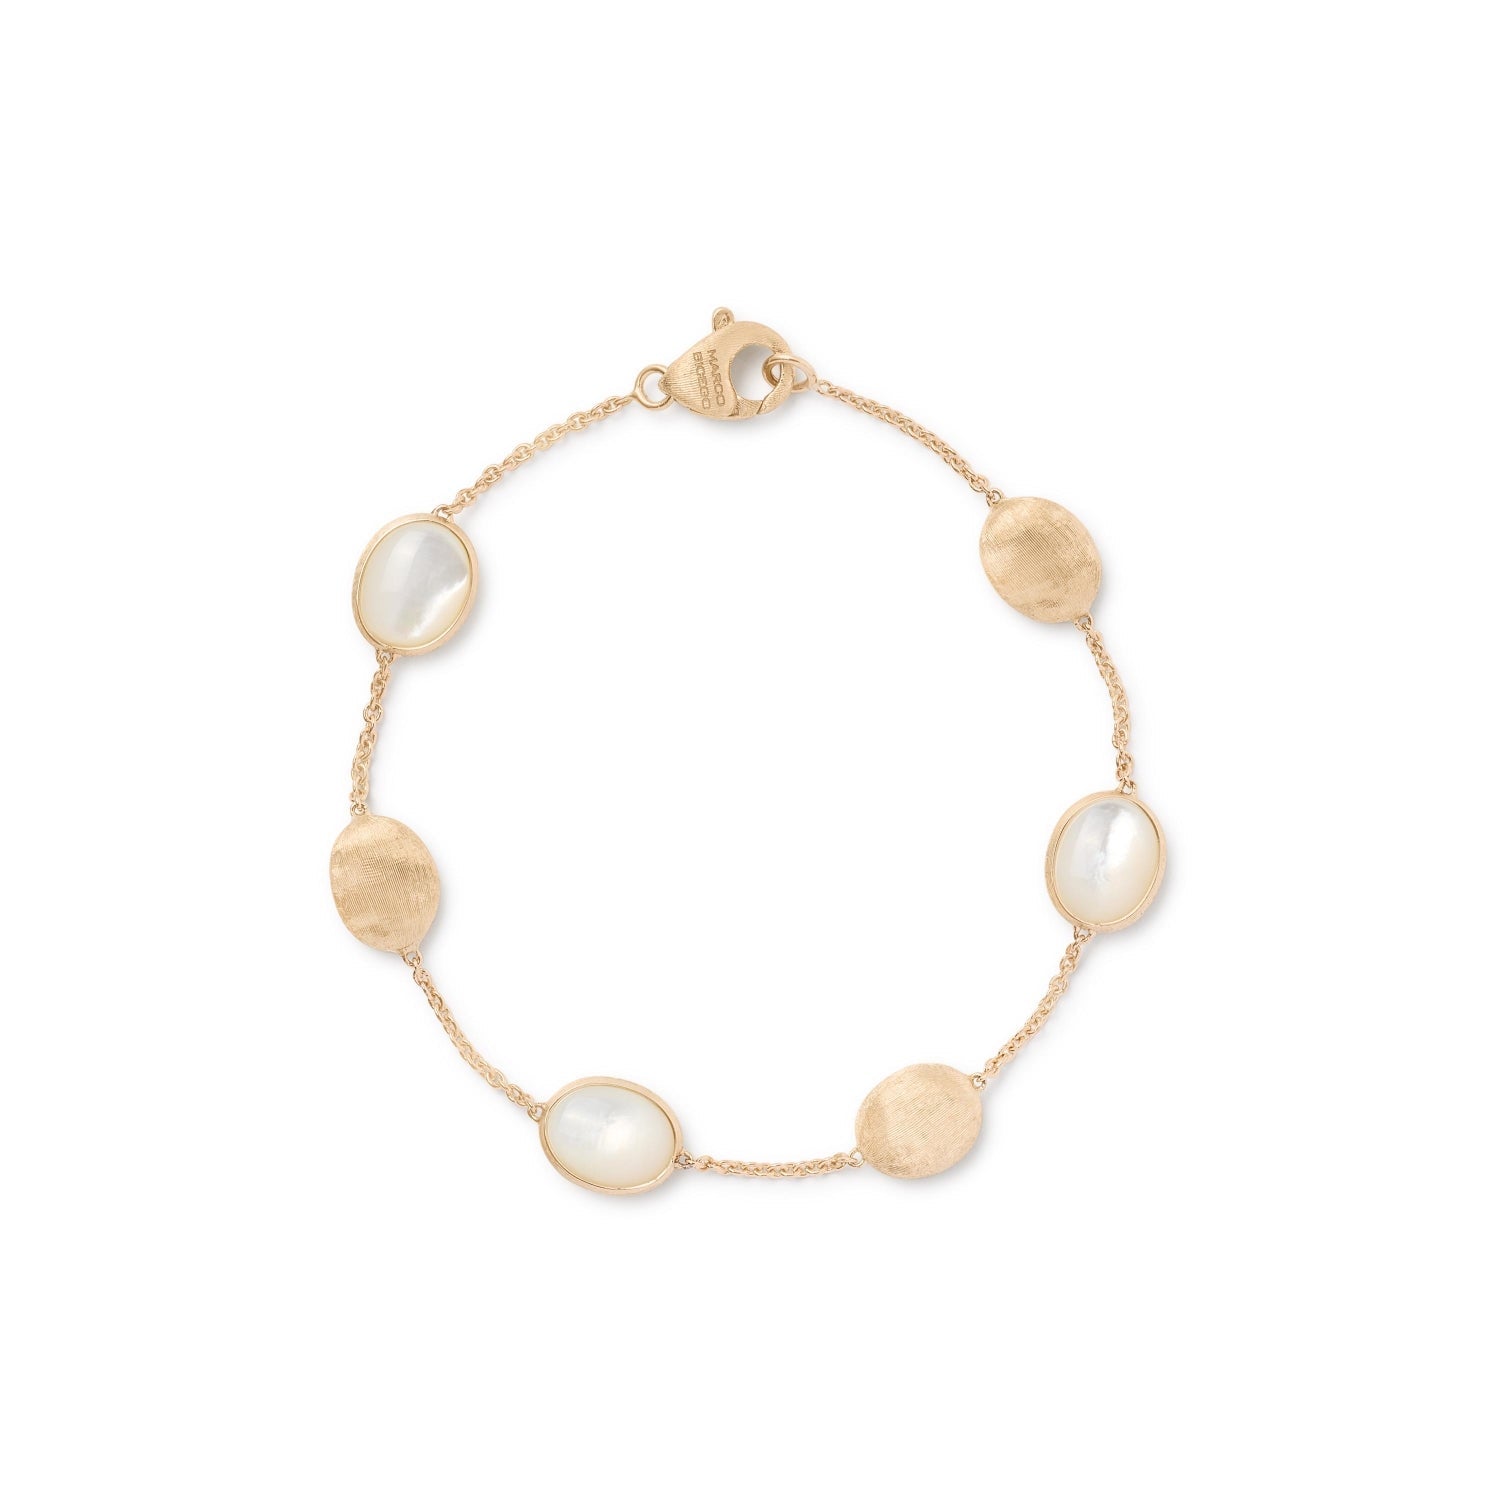 MARCO BICEGO SIVIGLIA 18CT YELLOW GOLD MOTHER OF PEARL BRACELET